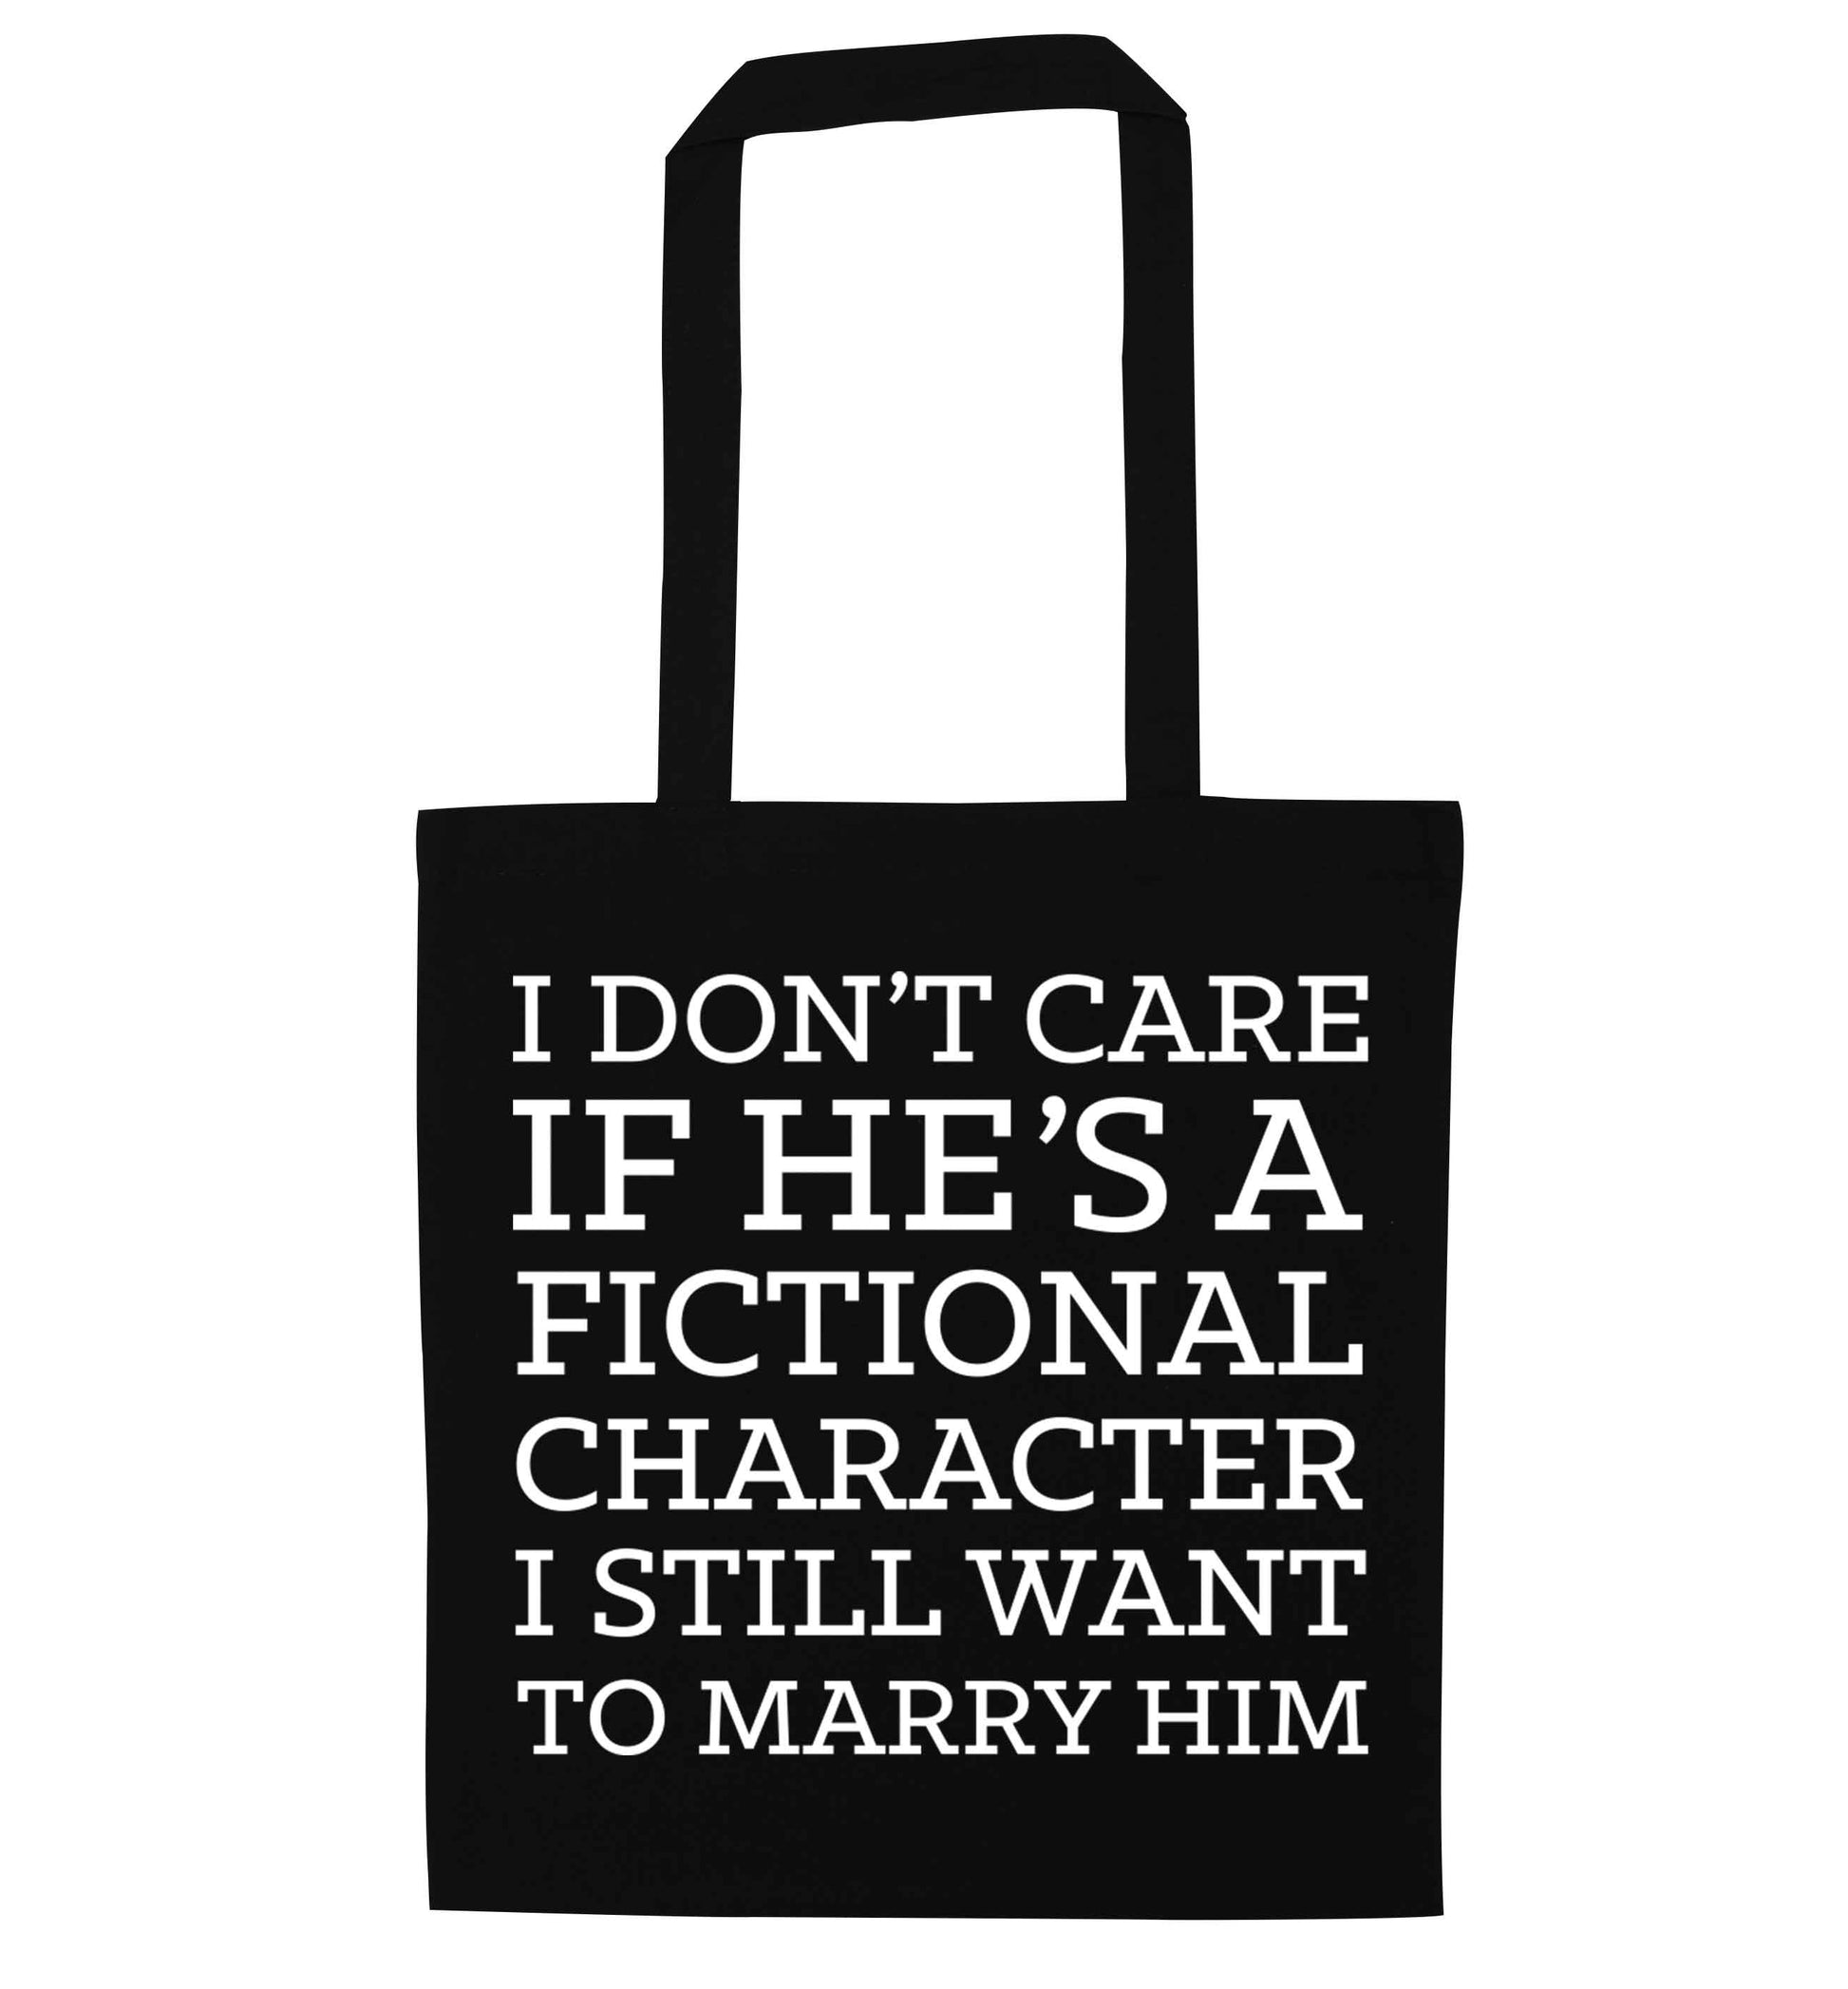 I don't care if he's a fictional character I still want to marry him black tote bag